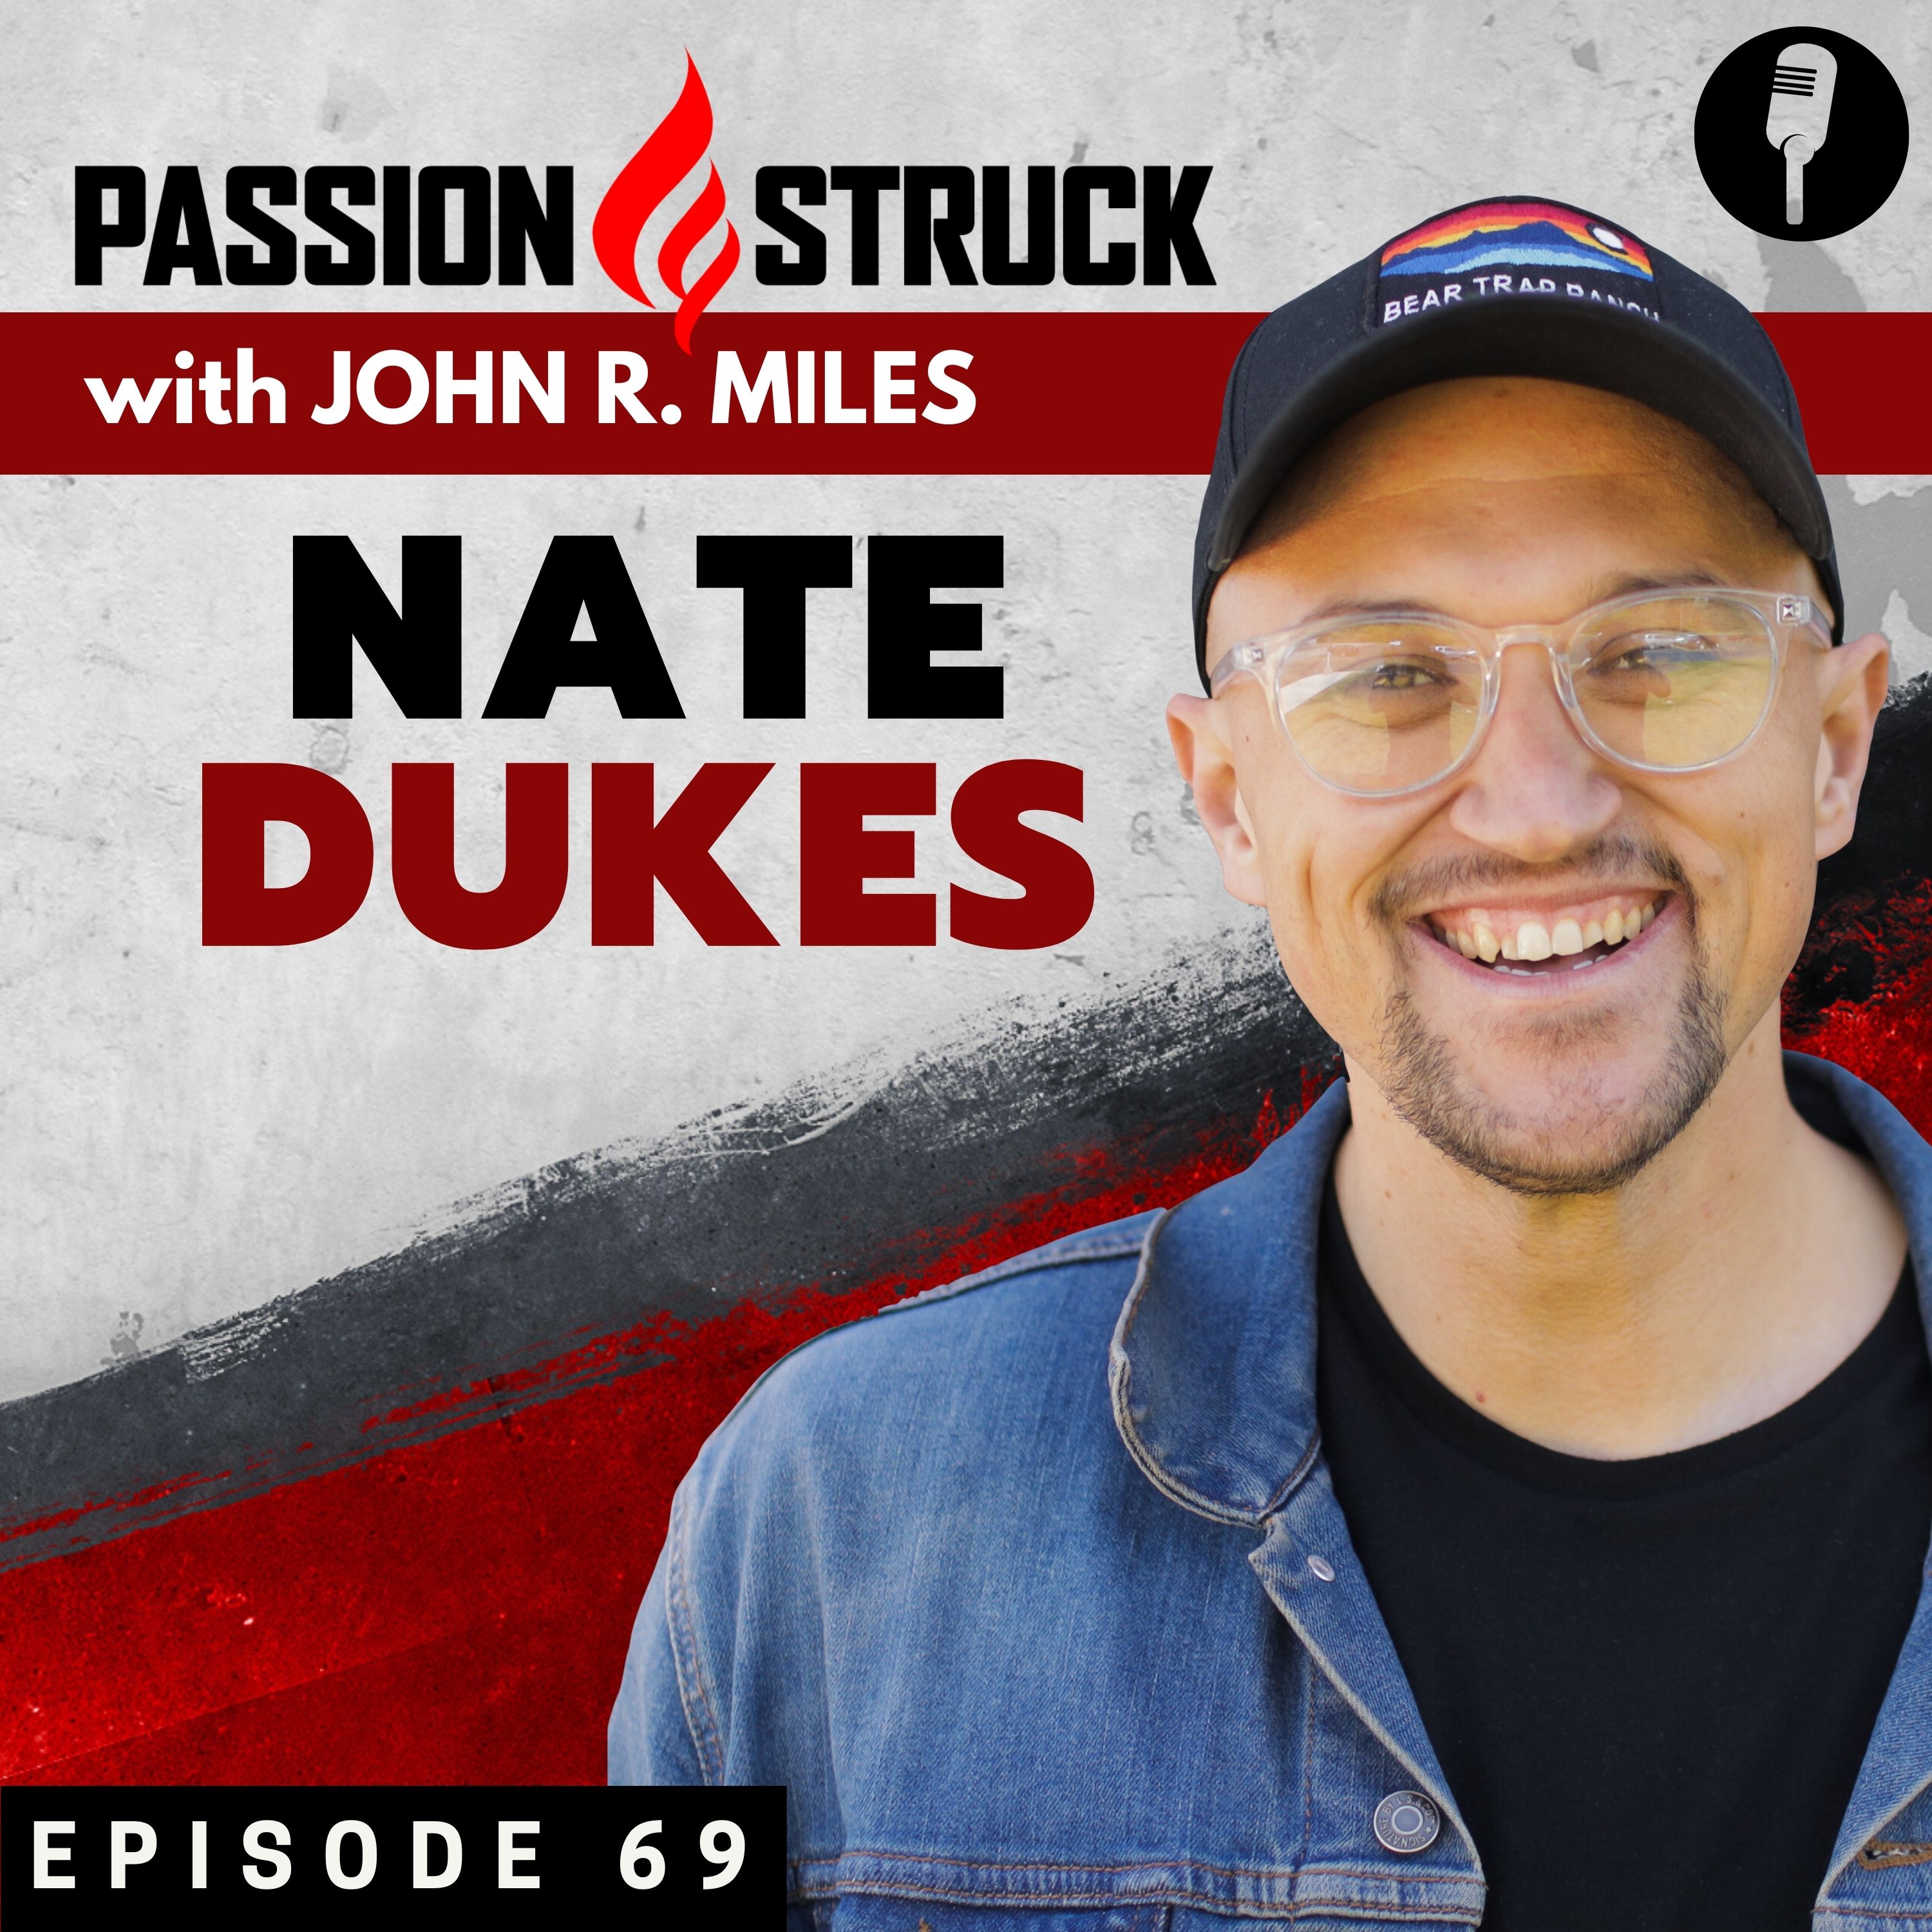 Passion Struck Podcast Cover with Nate Dukes on You'll never change syndrome